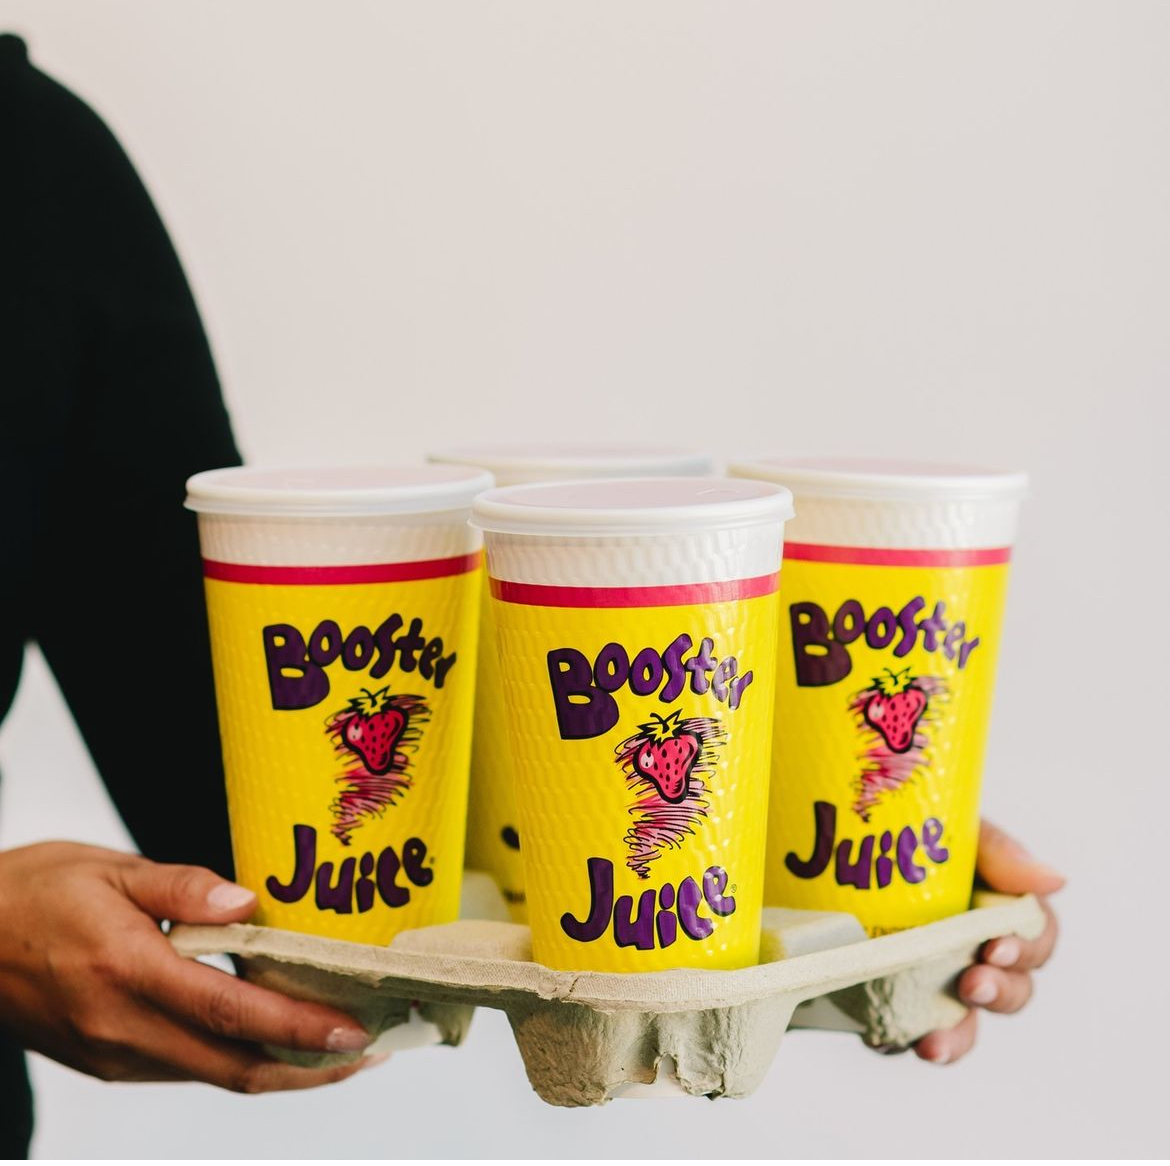 A person holding a tray of large take out smoothie cups